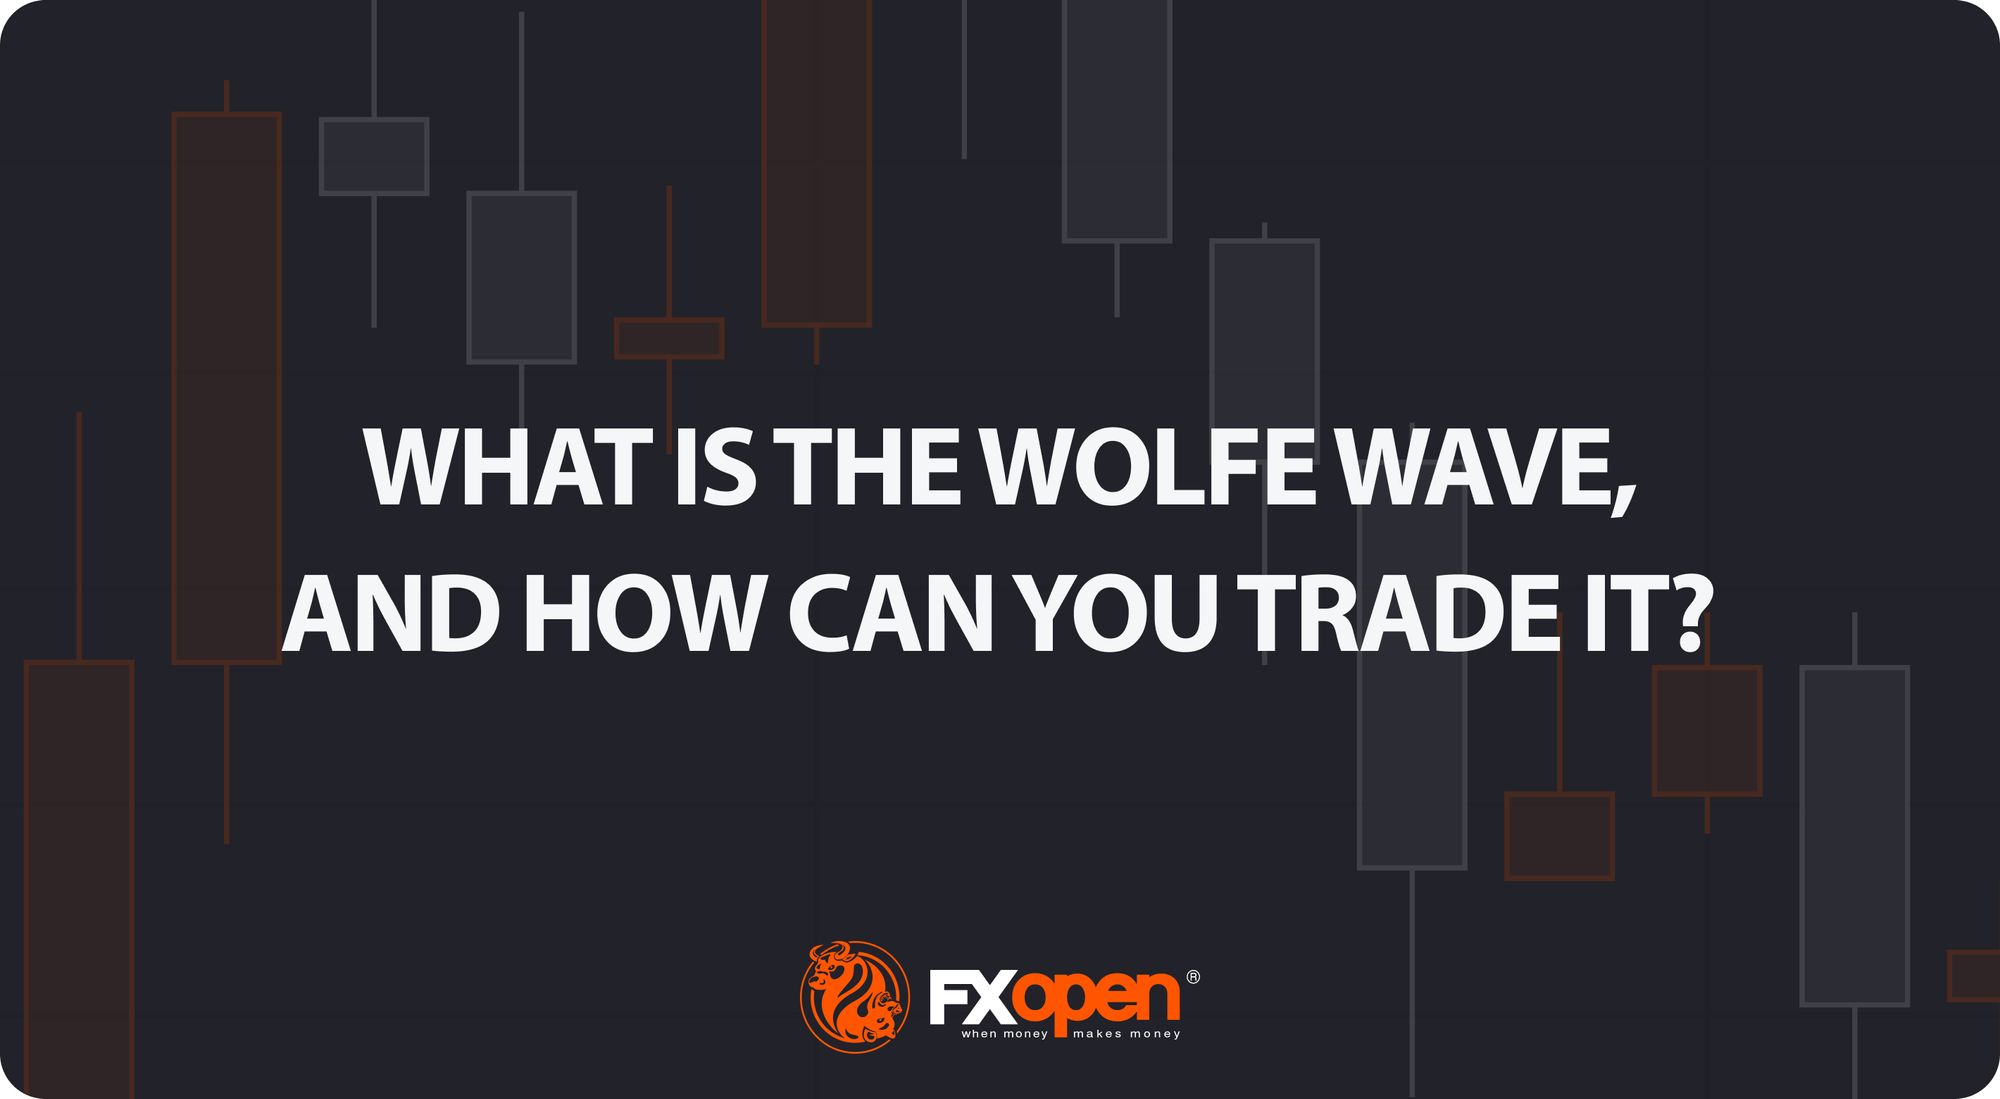 What Is the Wolfe Wave, and How Can You Trade It?